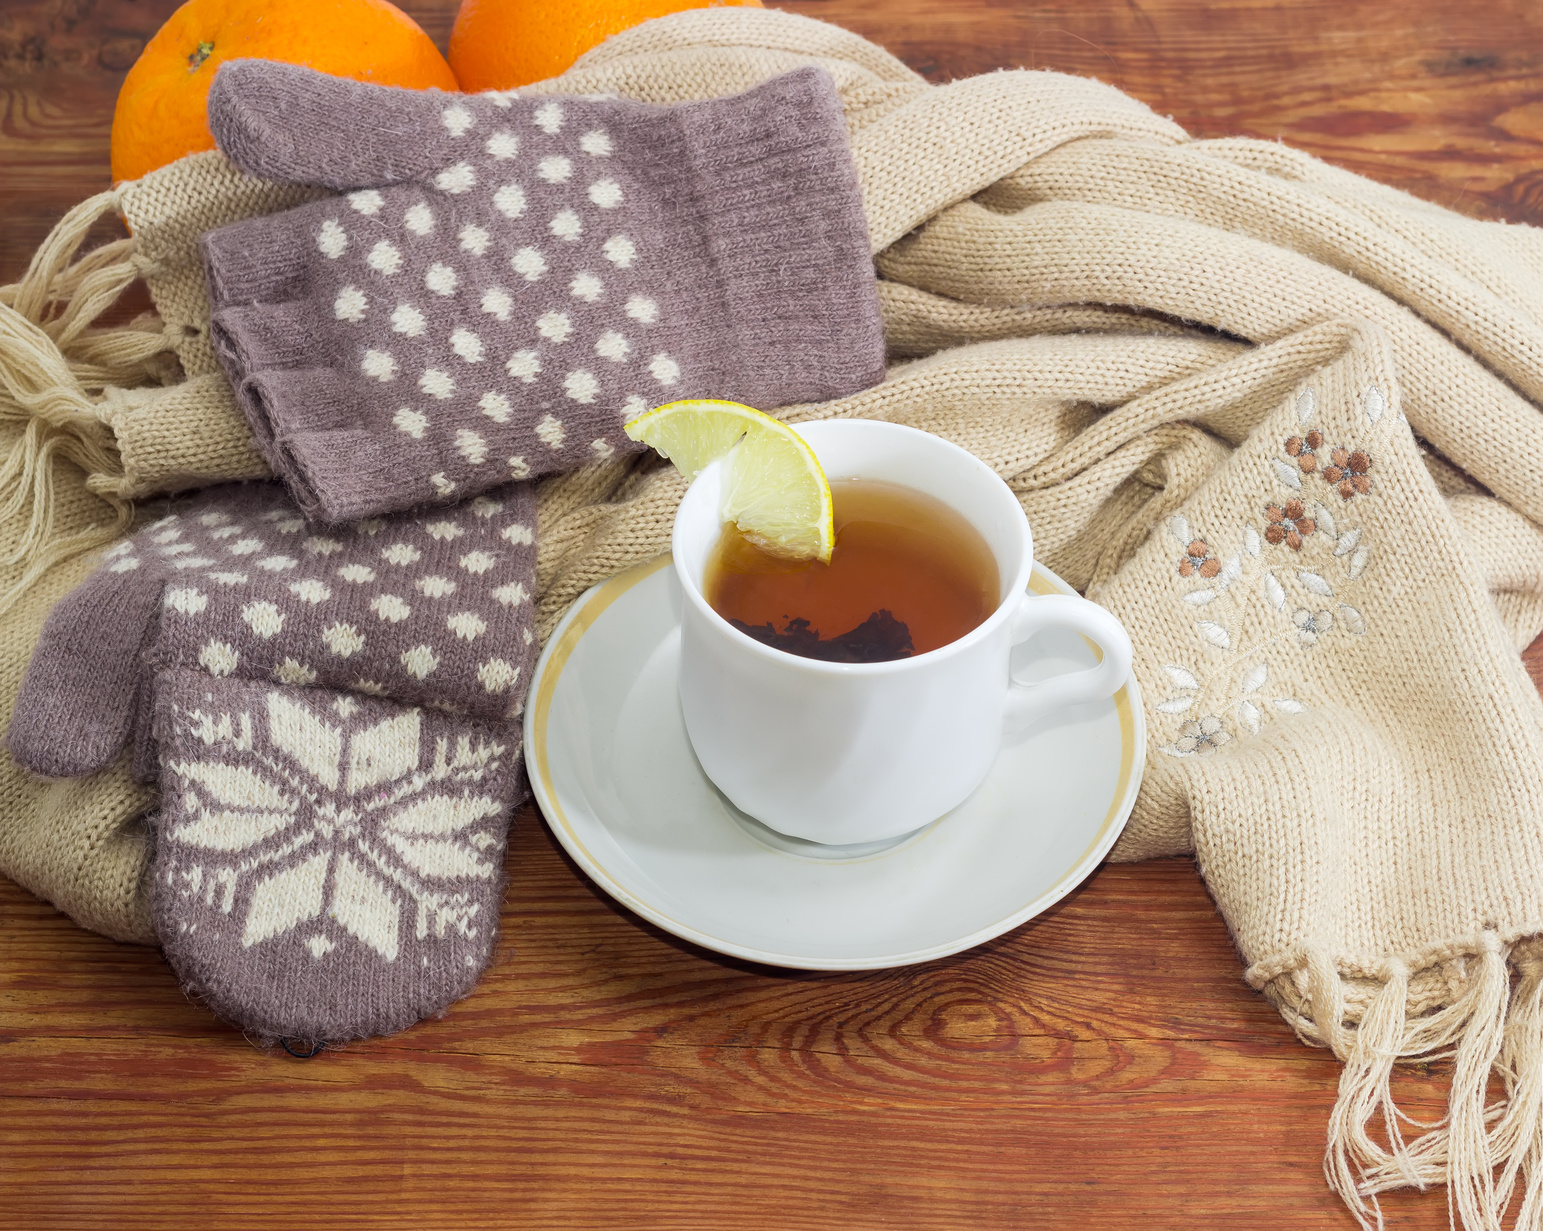 Cup of black tea with lemon on a background of women's woolen hybrid mittens and thick knitted scarf on wooden surface